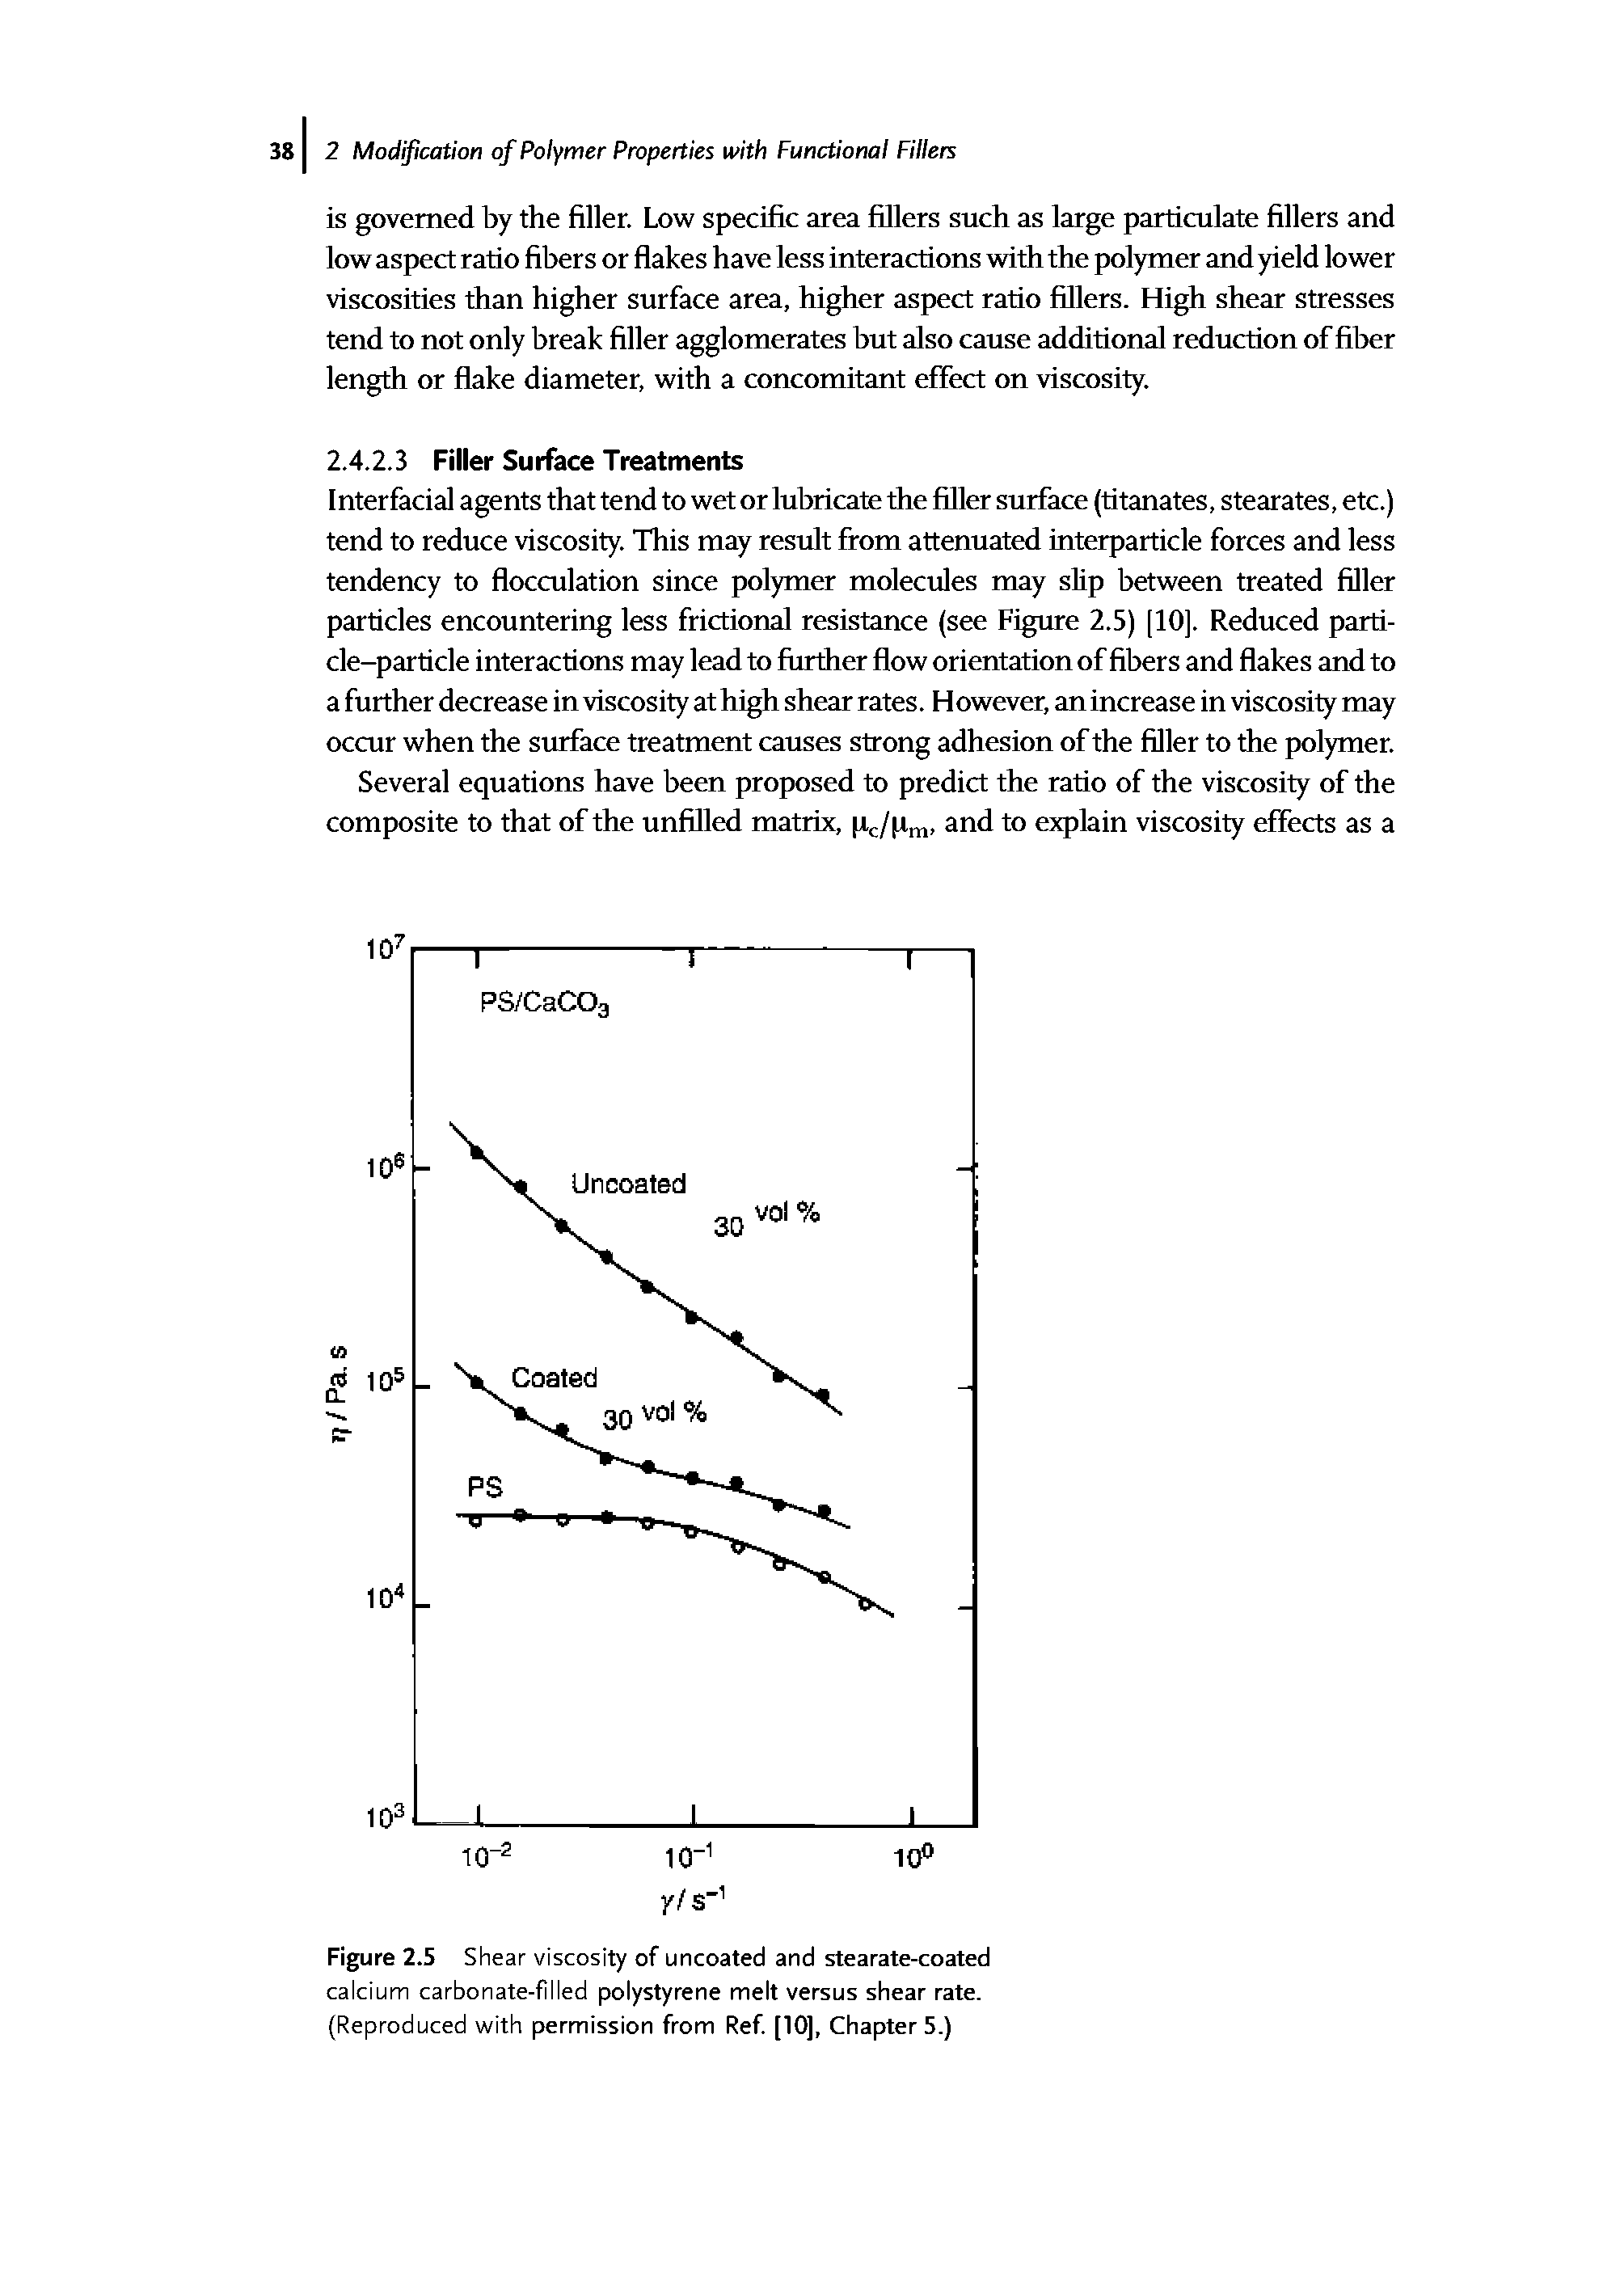 Figure 2.5 Shear viscosity of uncoated and stearate-coated calcium carbonate-filled polystyrene melt versus shear rate. (Reproduced with permission from Ref [10], Chapters.)...